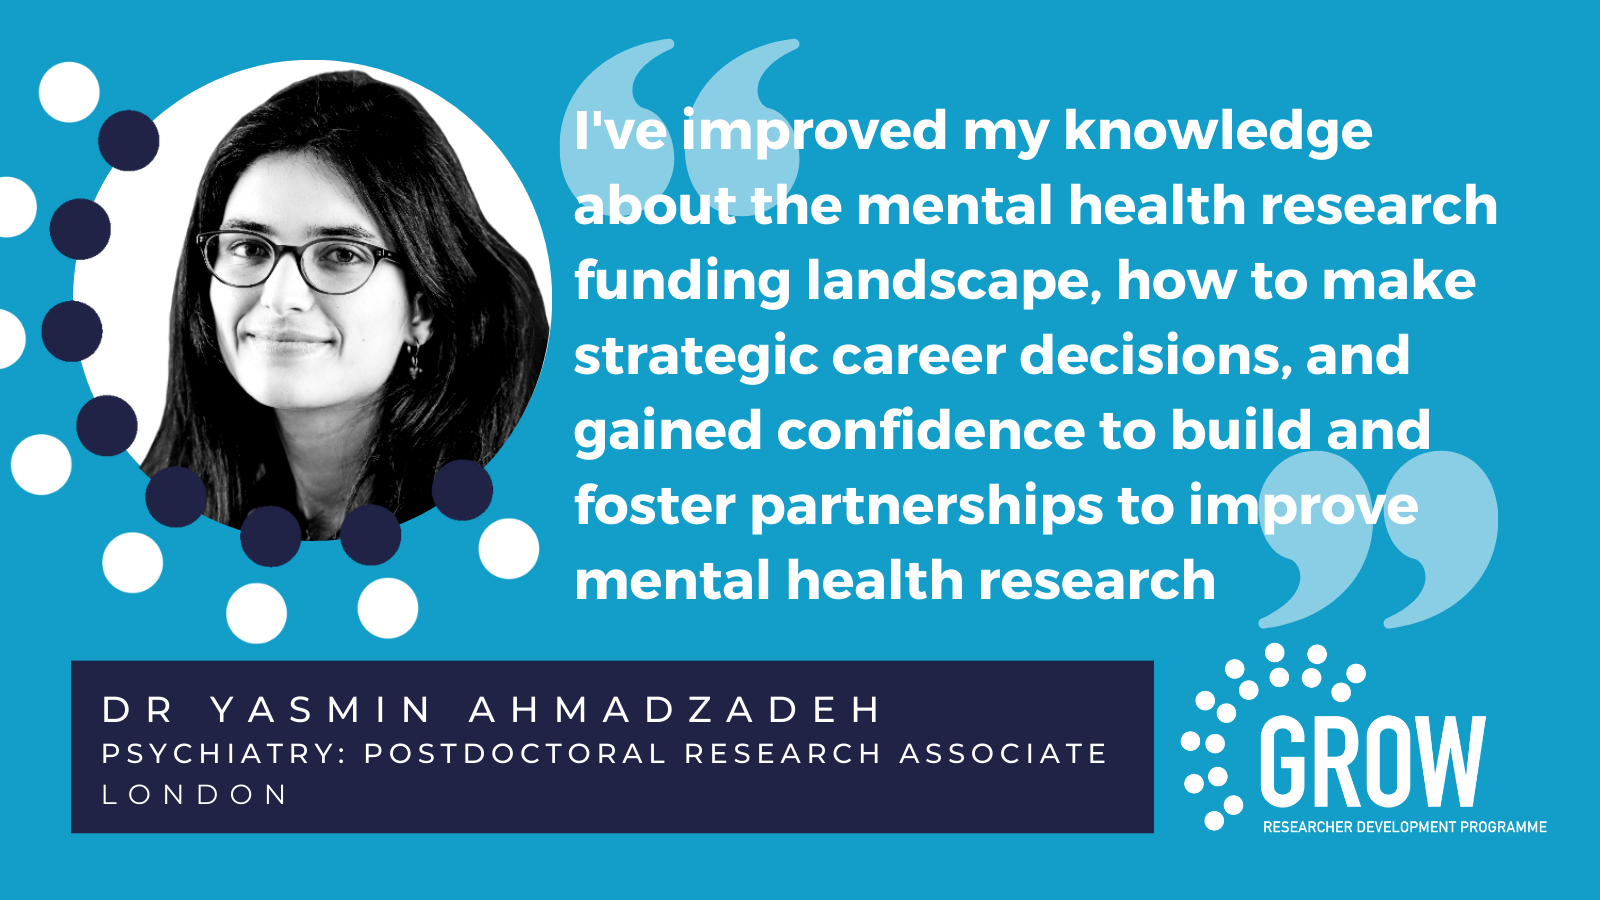 I've improved my knowledge about the mental health research funding landscape, how to make strategic career decisions, and gained confidence to build and foster partnerships to improve mental health research - DR YASMIN AHMADZADEH | Psychiatry: Postdoctoral research associate London